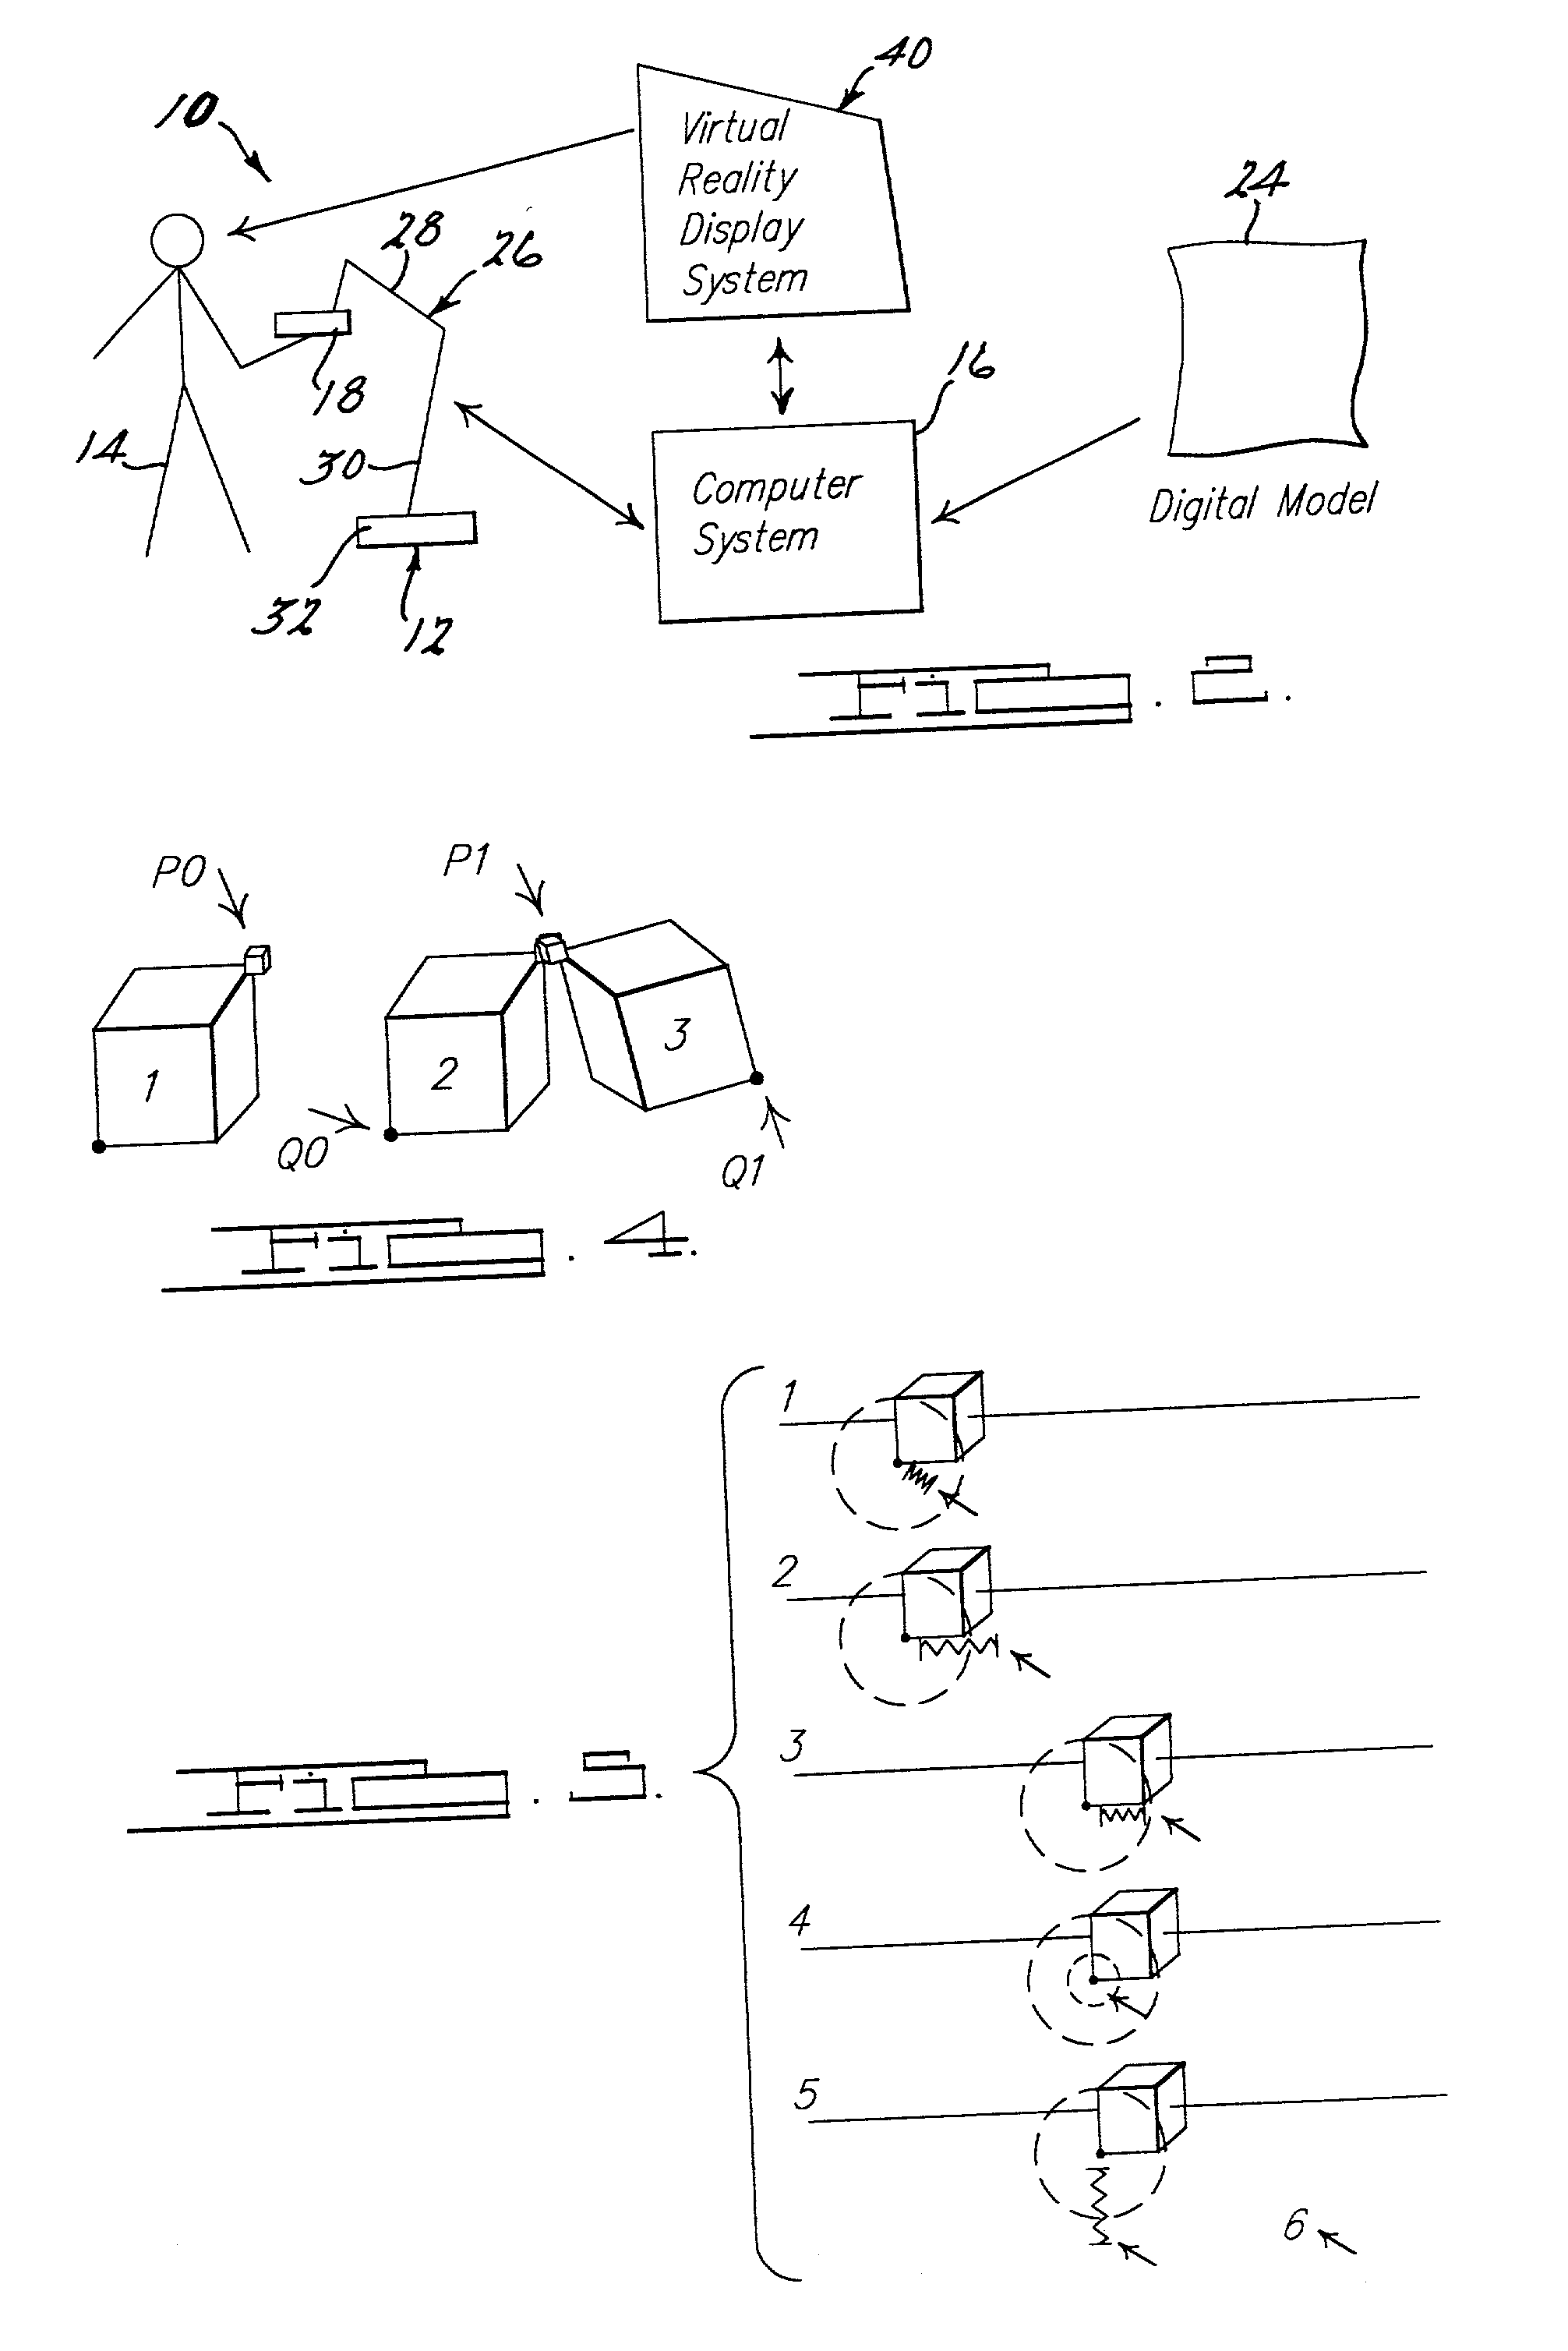 System and method for virtual interactive design and evaluation and manipulation of vehicle mechanisms